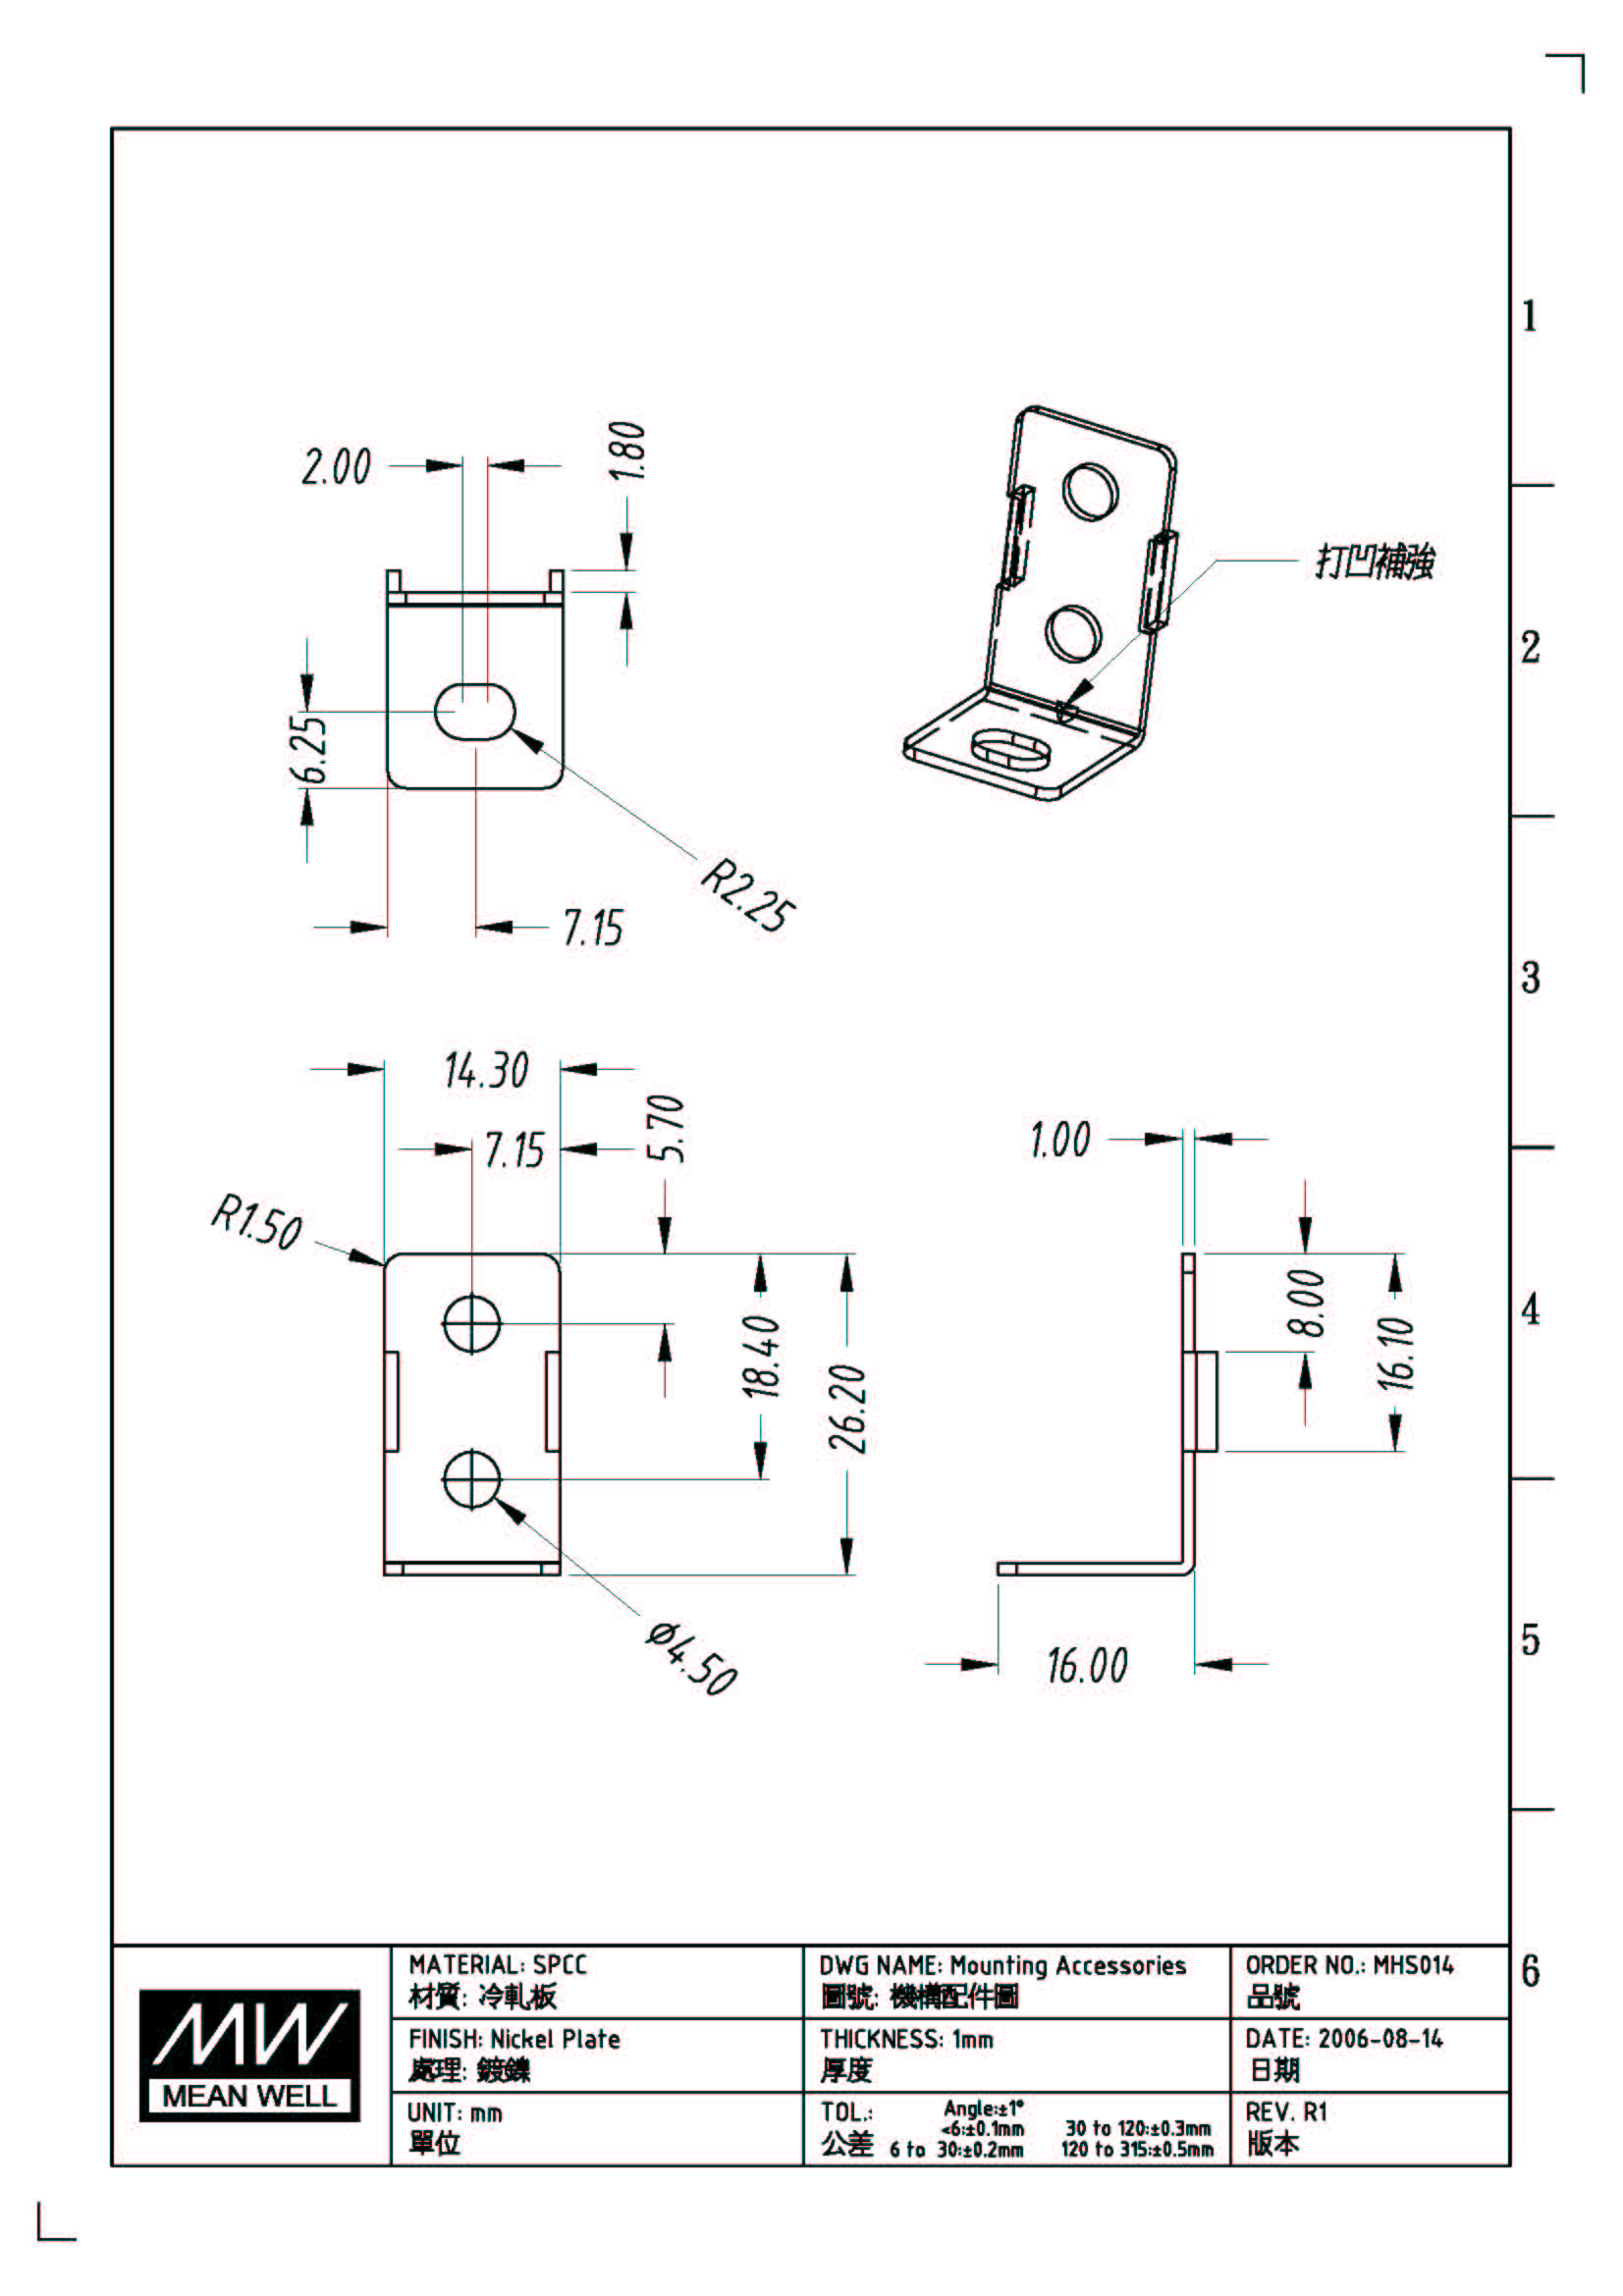 Mean Well Mounting Accessories MHS014 - Mounting Accessory Diagram Graphic